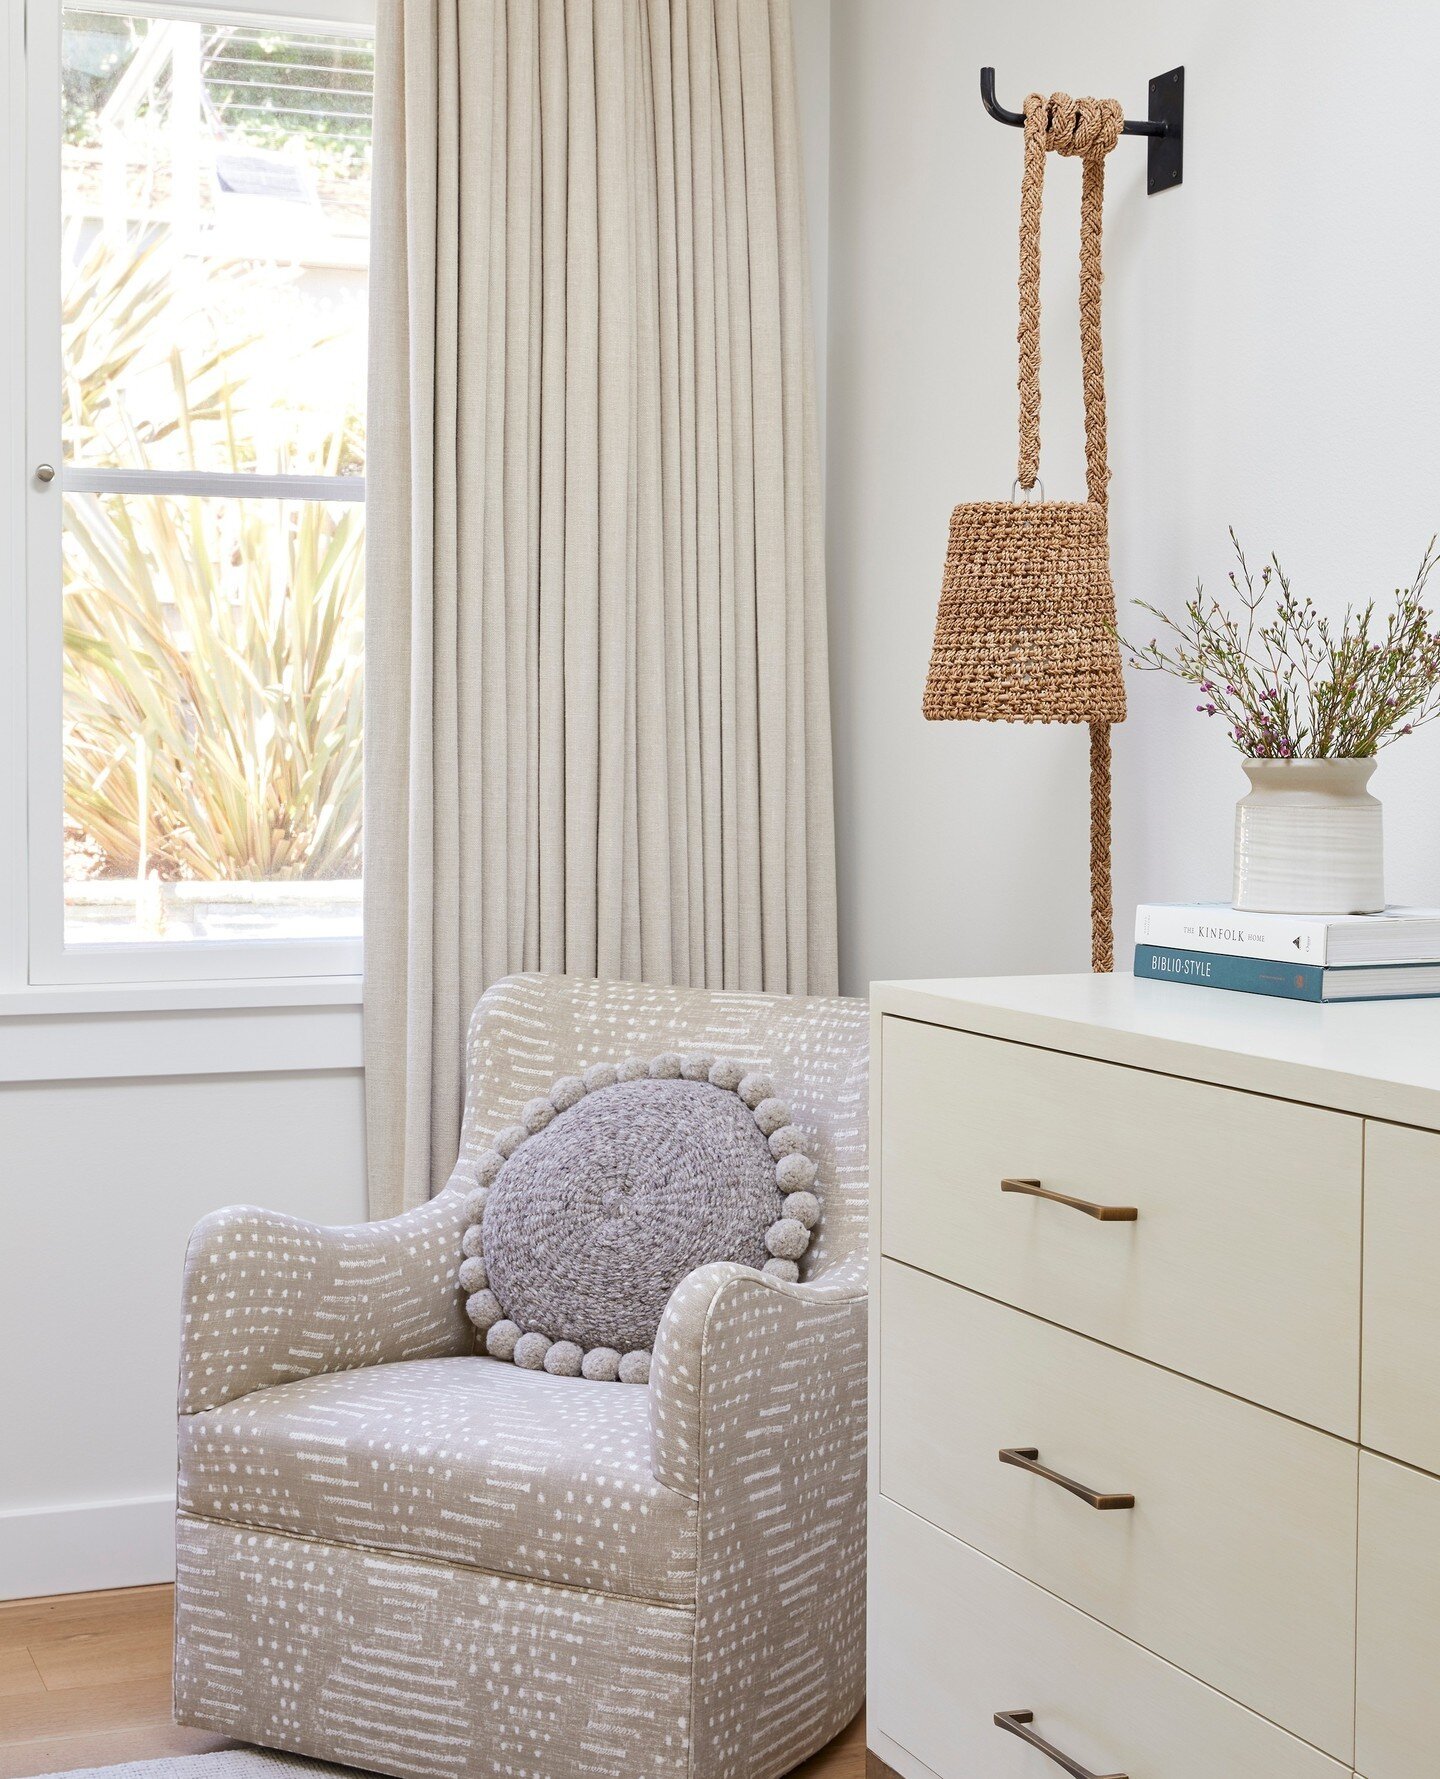 We leaned in and layered on the texture in this pretty little bedroom corner... from the gorgeous linen drapery to the woven wall sconce and custom upholstered swivel chair. It's the perfect spot to cozy up and start planning for the week ahead. Anyo